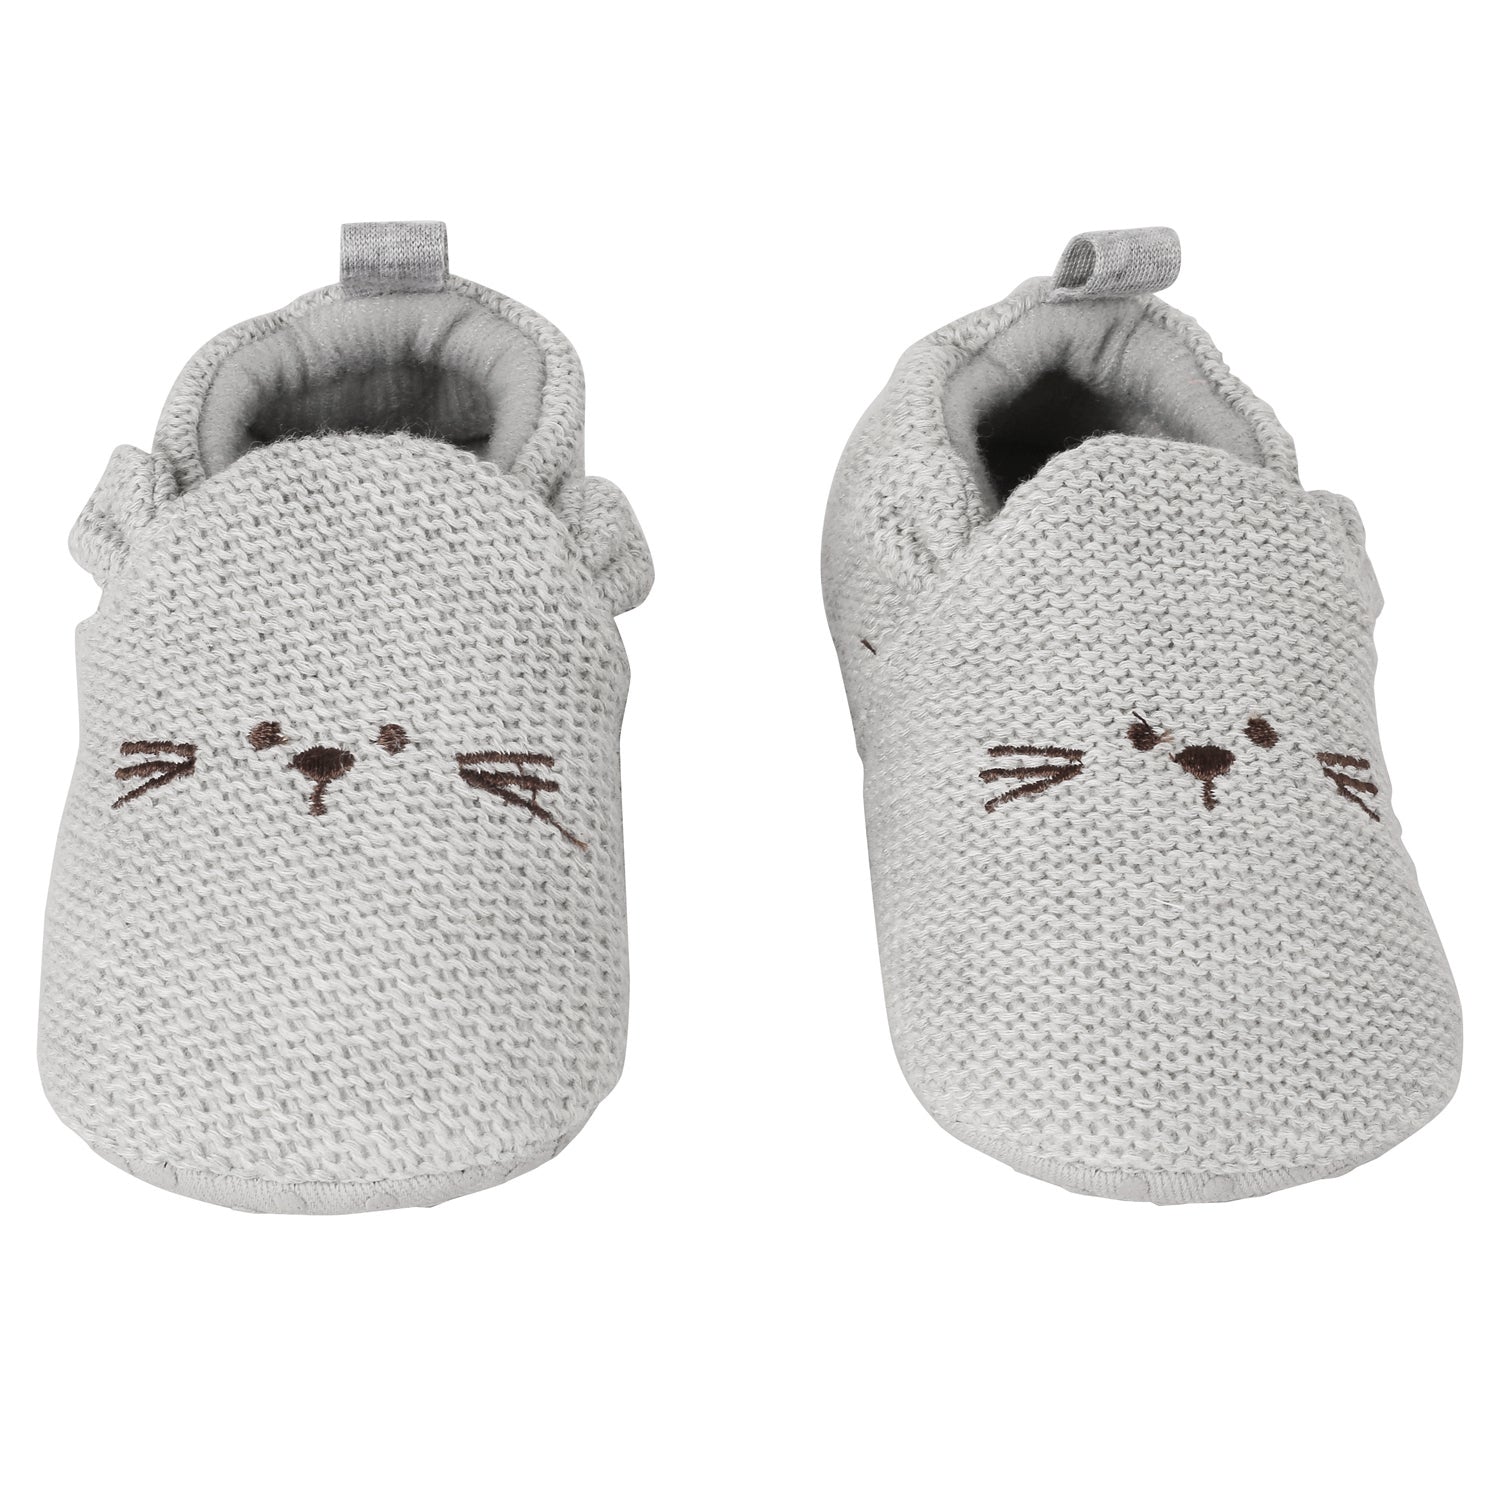 Knitted WHUTE Casual Booties - Baby Moo